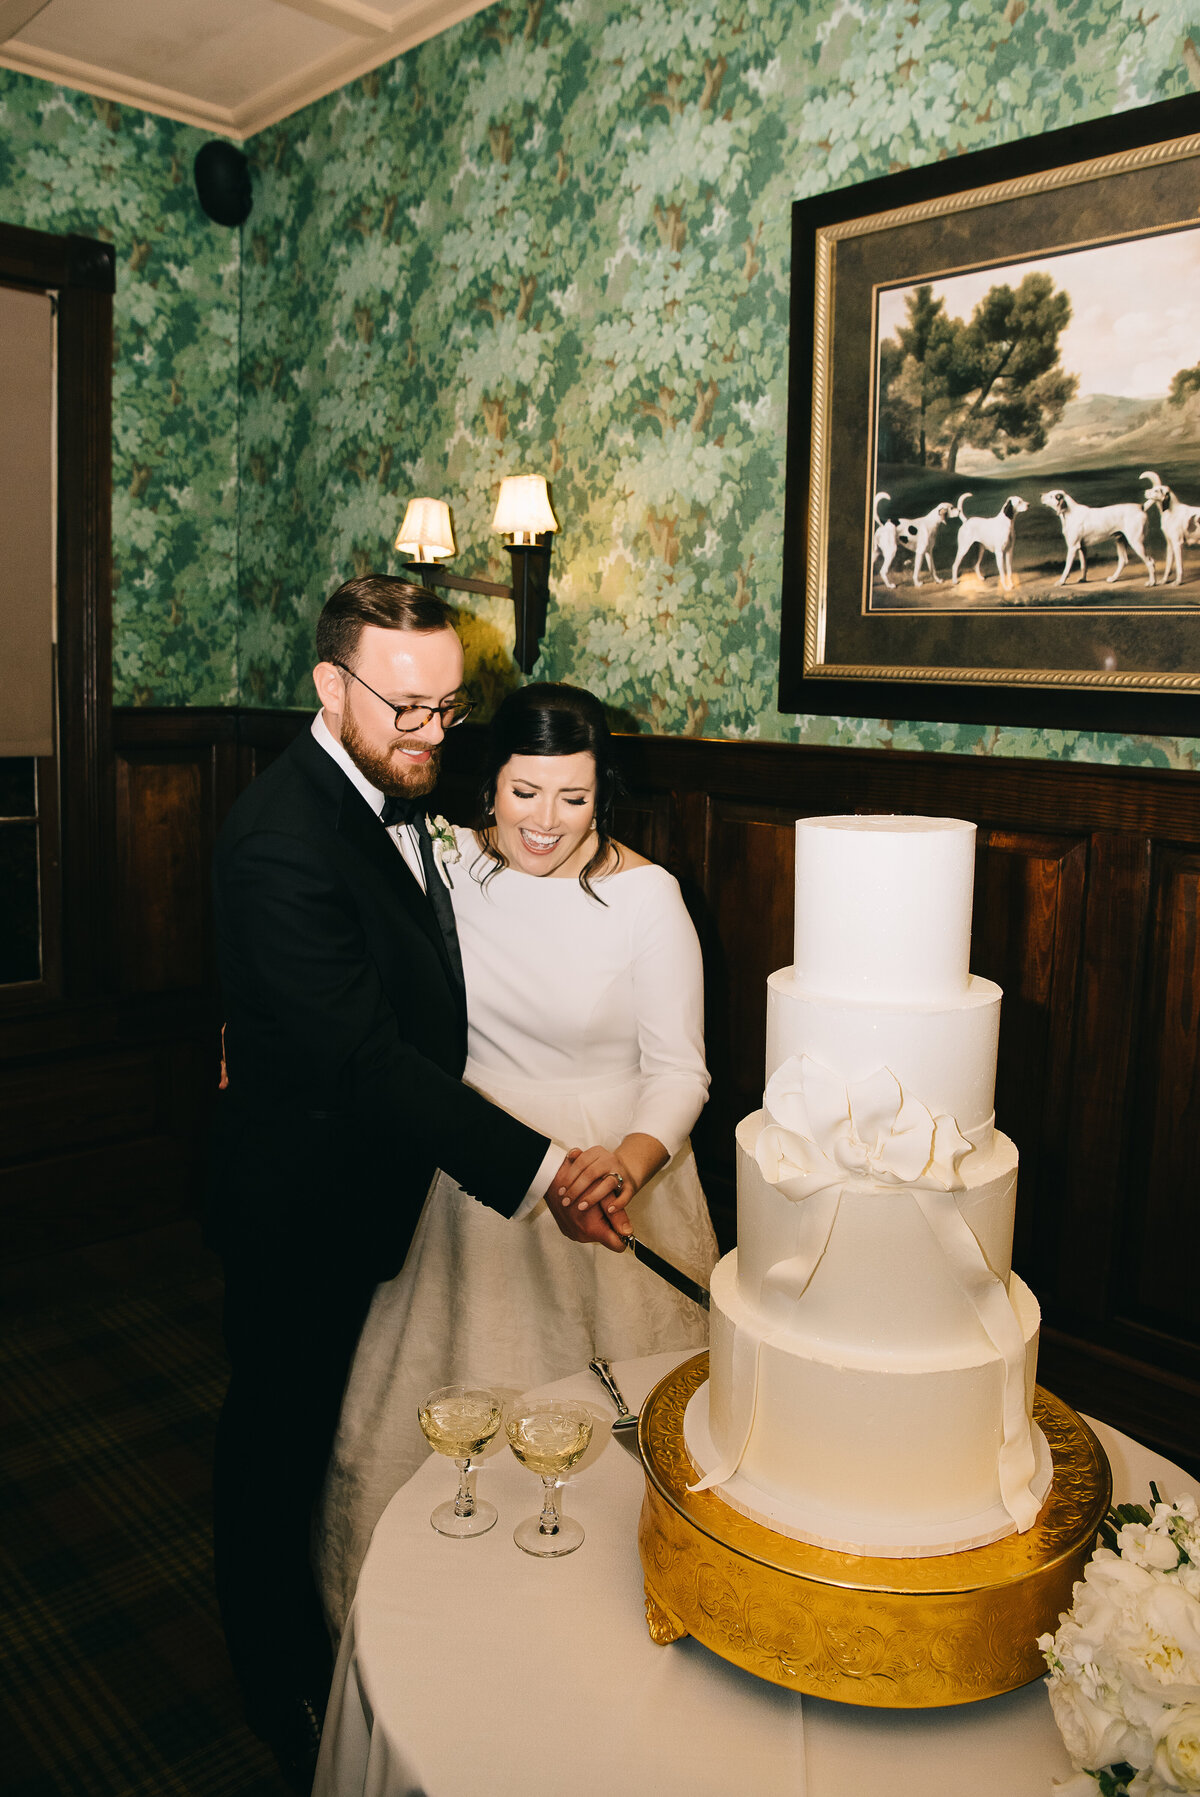 Bride and groom cutting the cake at the Willcox Aiken